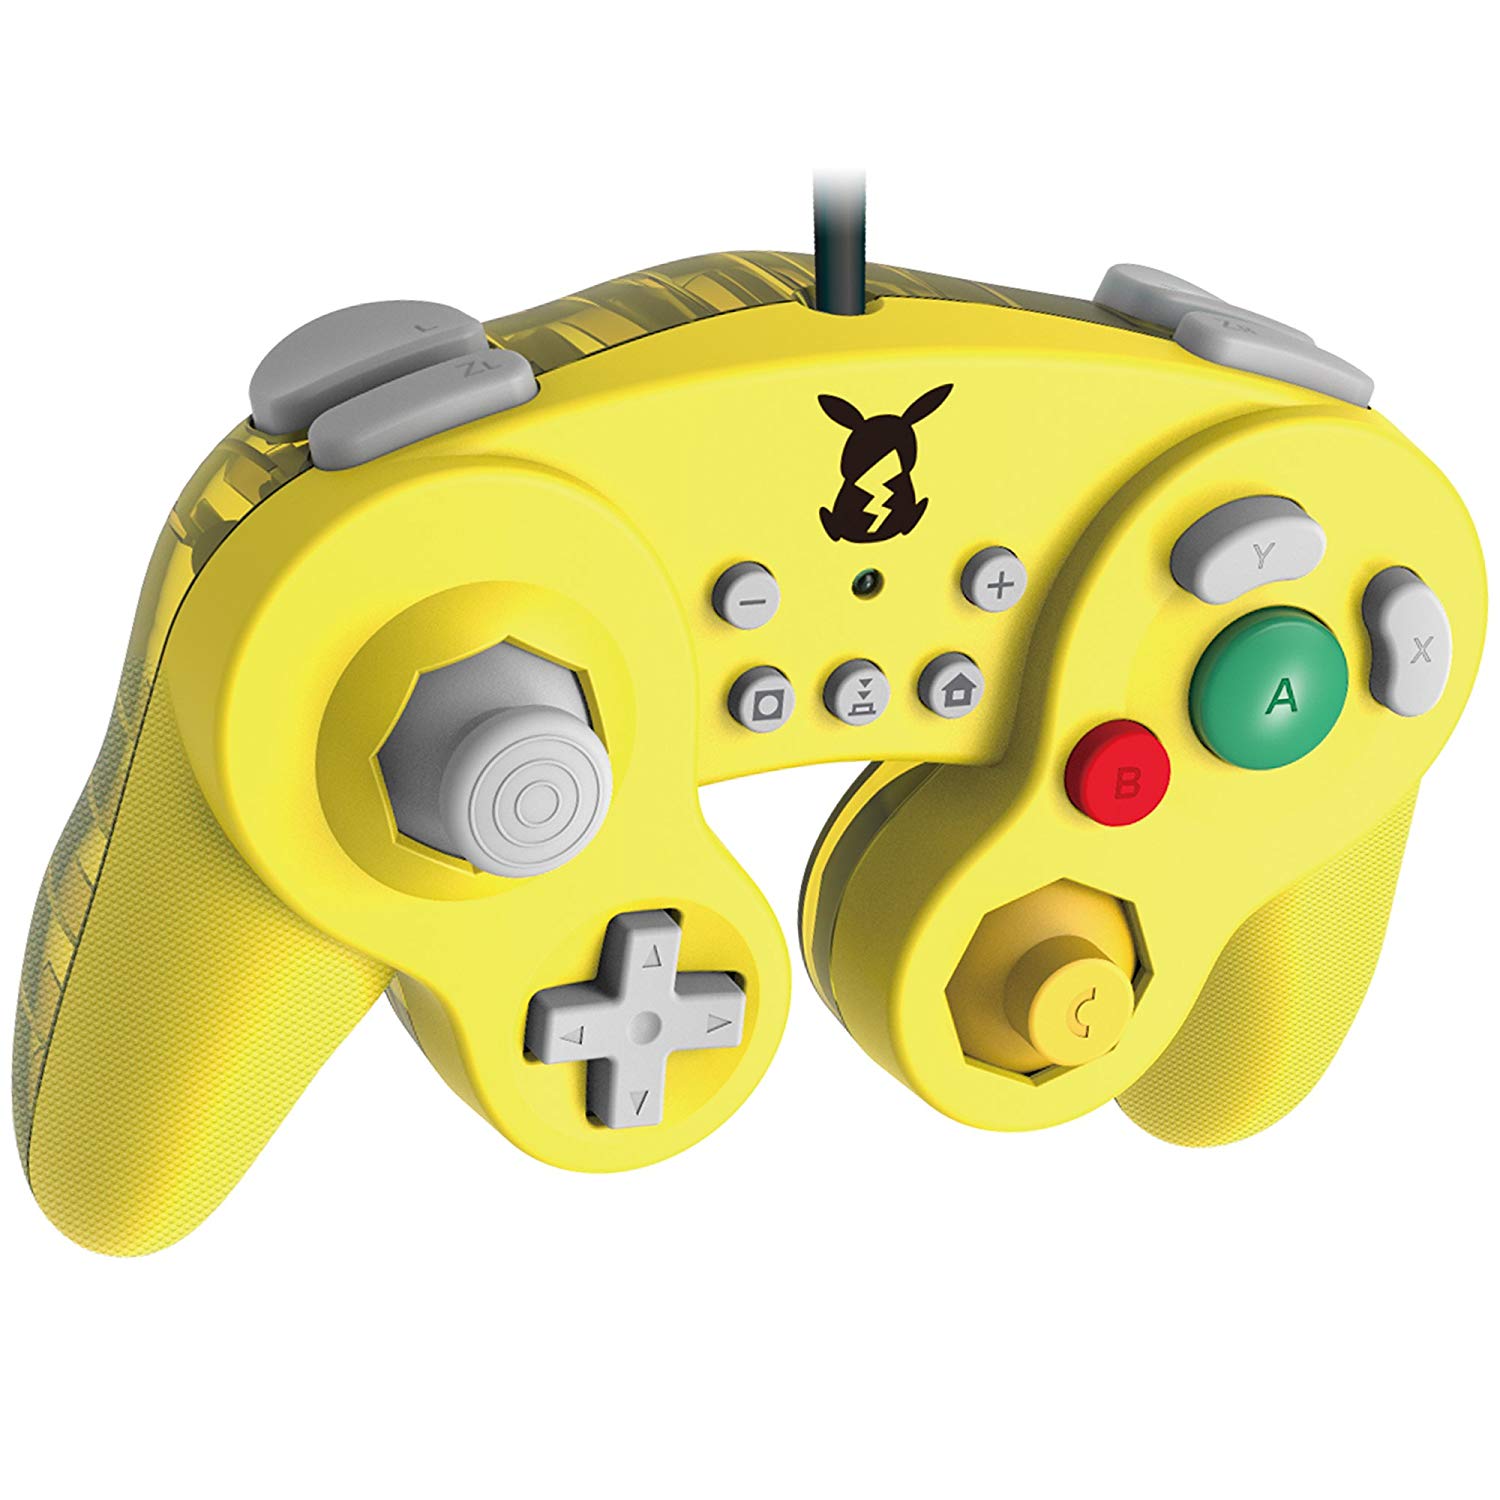 HORI Reveals Mario, Zelda, Switch – Pikachu Controllers GameCube NintendoSoup And For